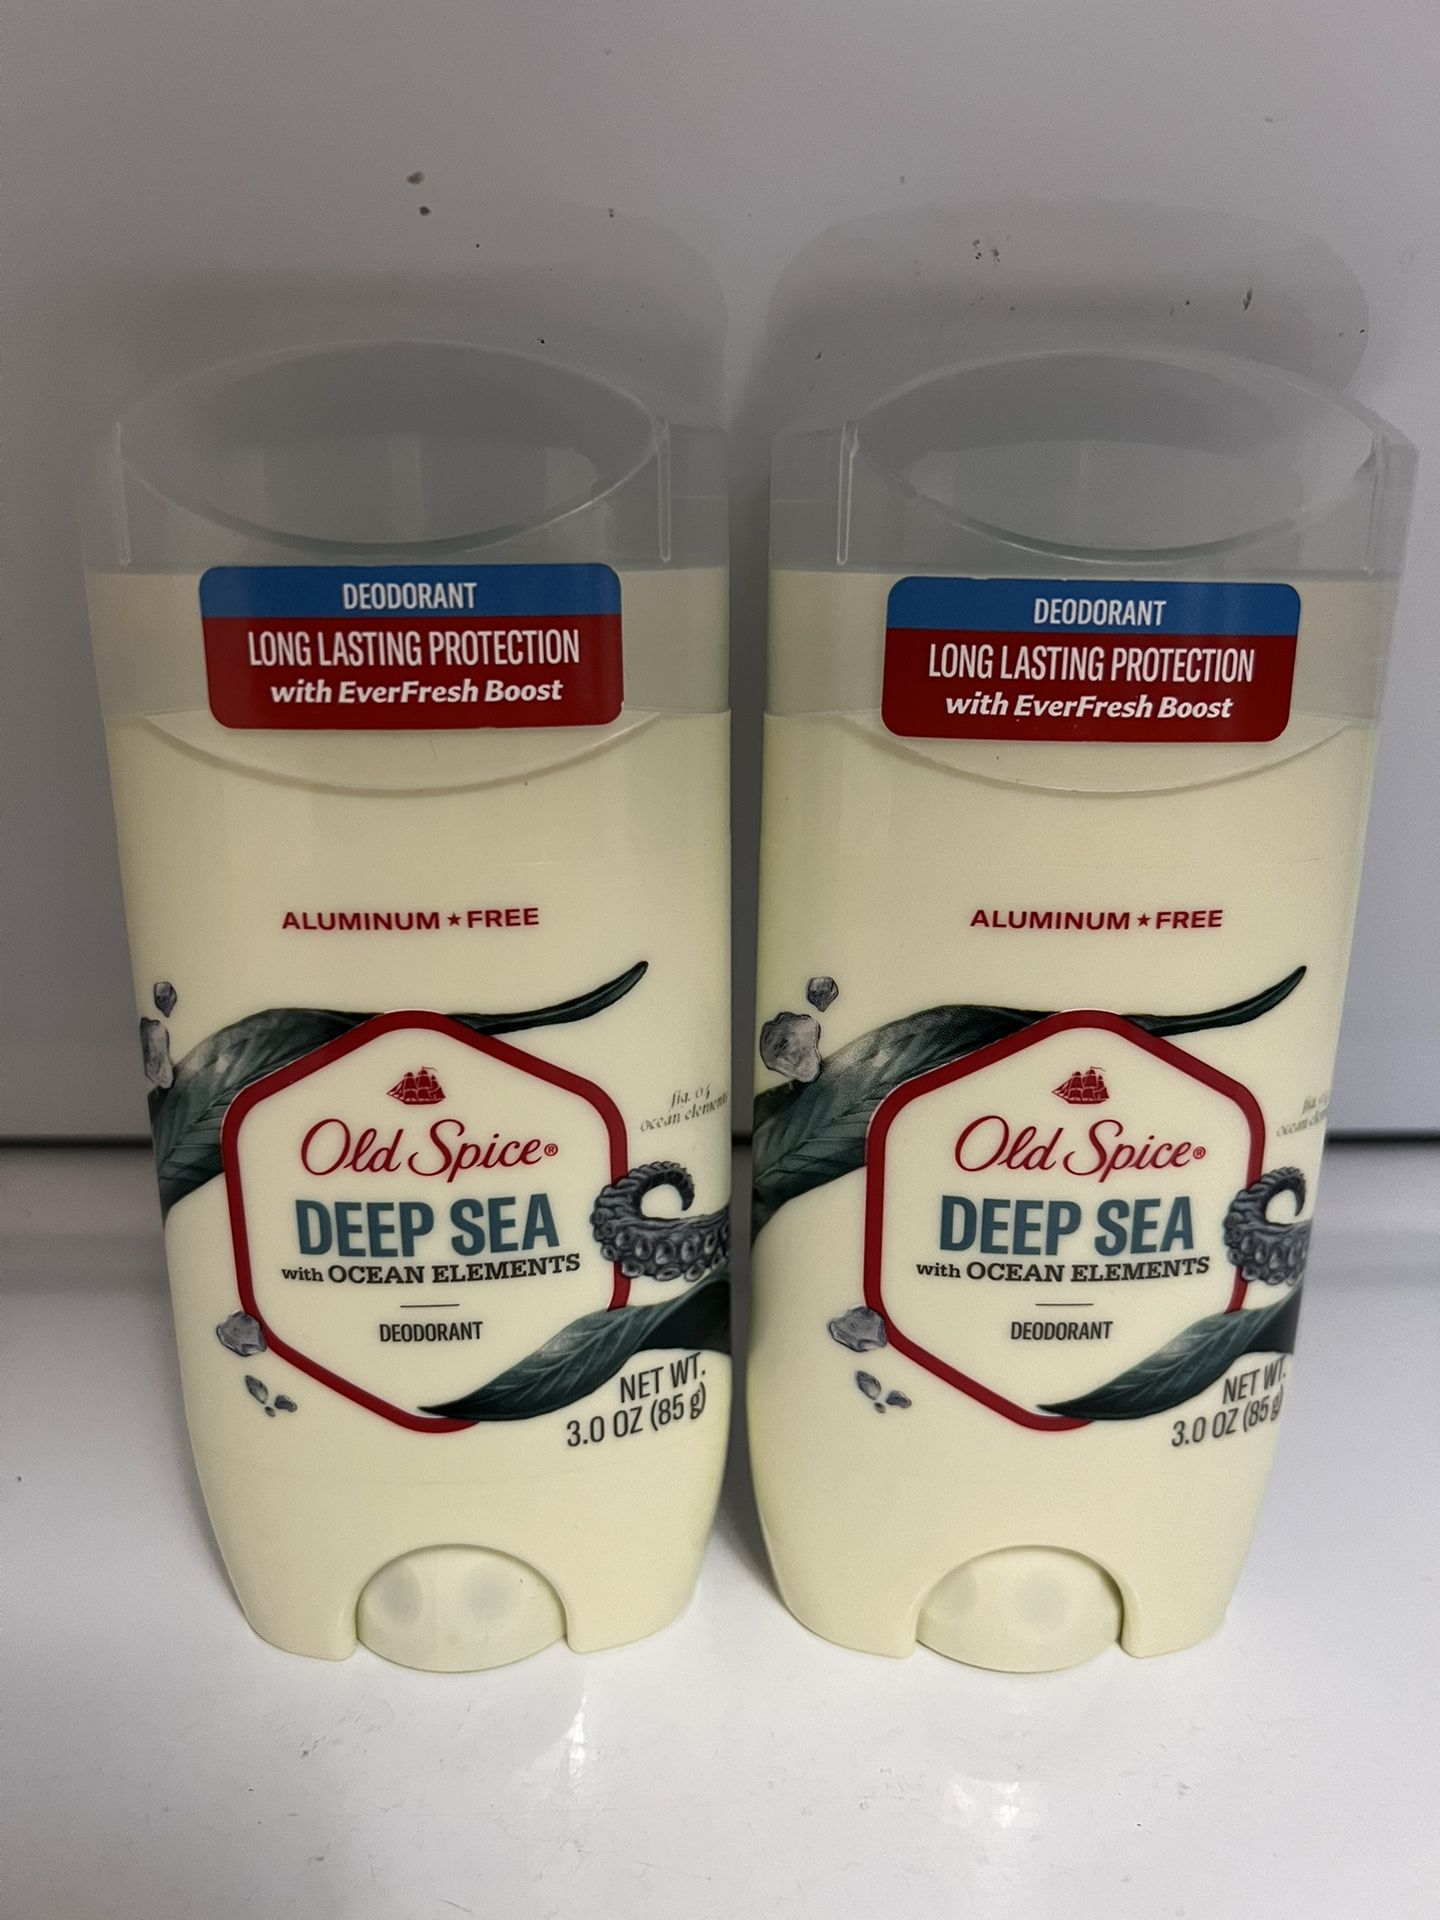 Old Spice deodorant for Men 2 for $7